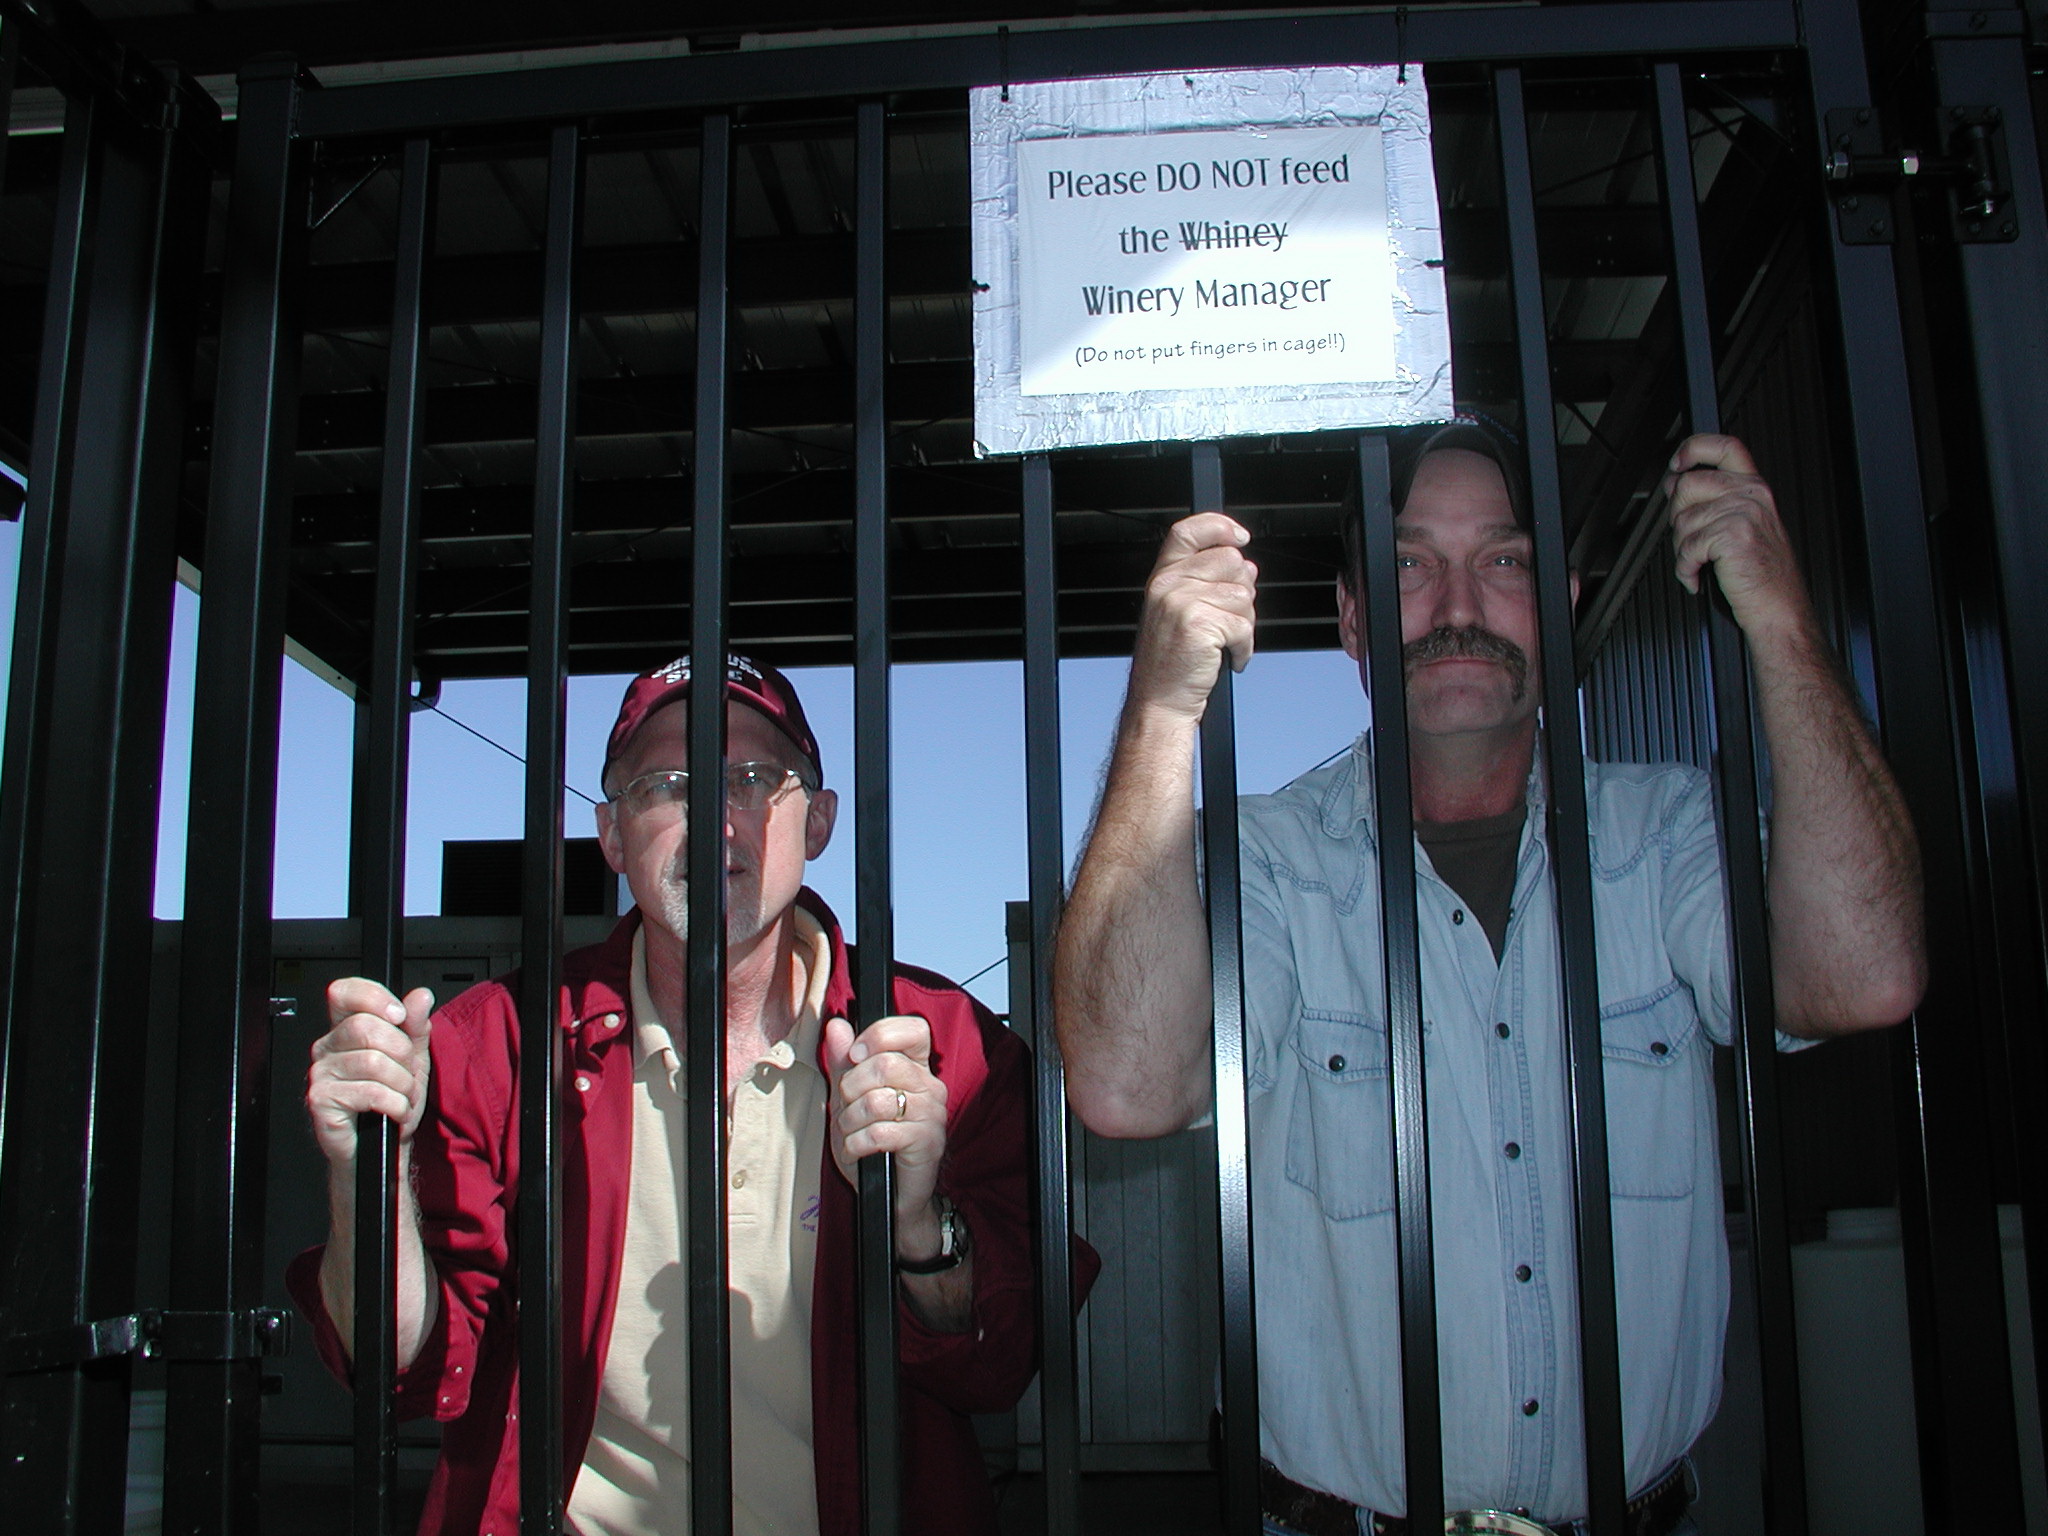 Dr. Karl Wilker (left) and C. J. Odneal (right) peer through the bars of the newly secured and covered outdoor wine processing area.